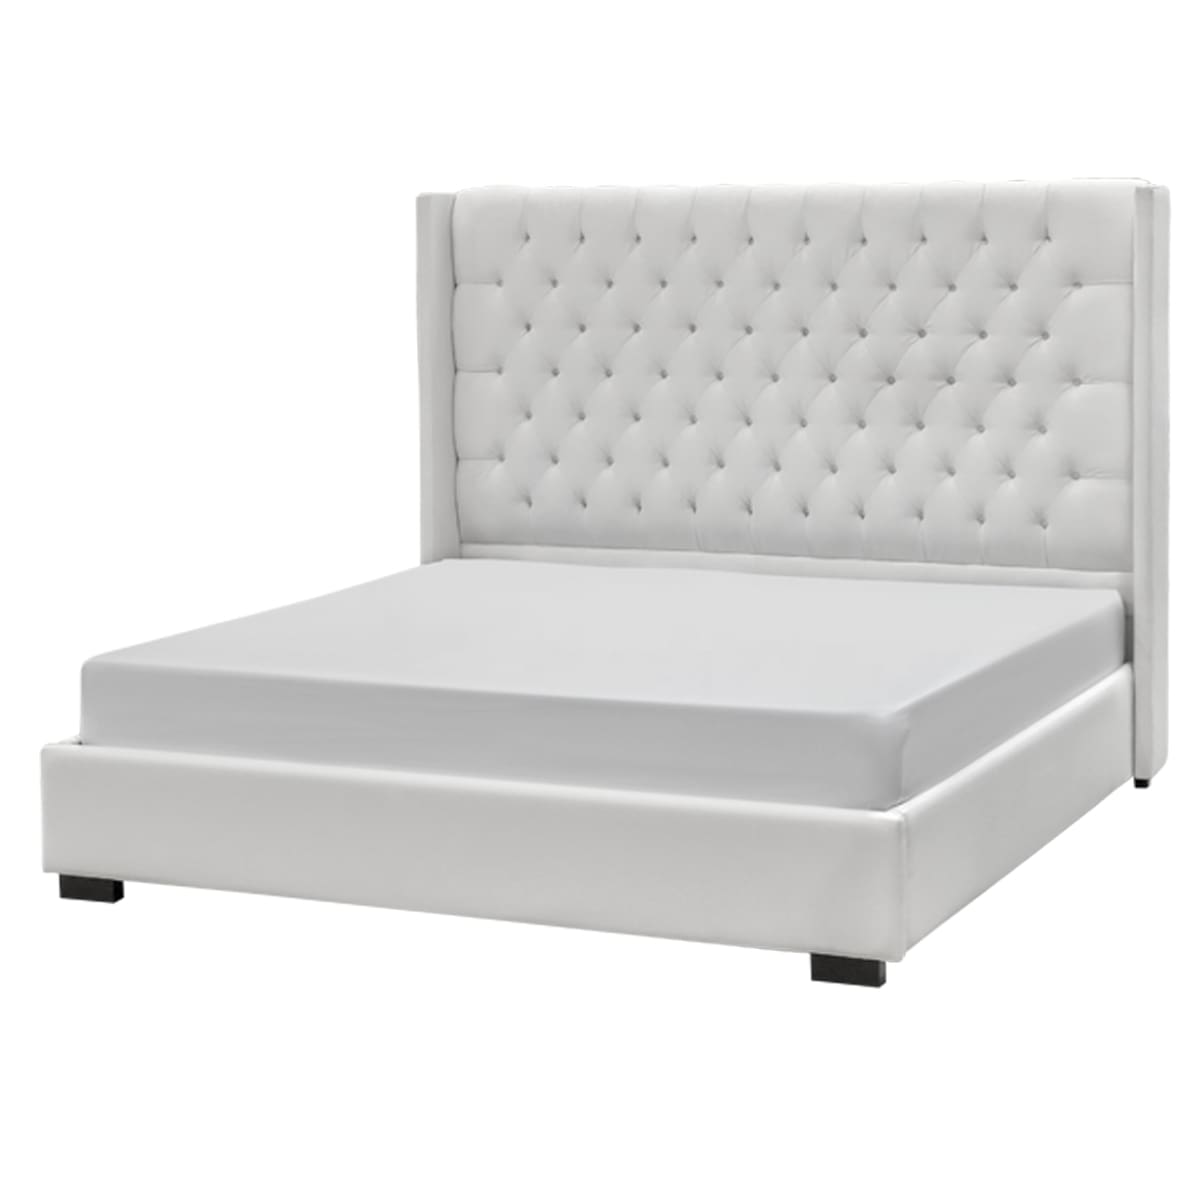 Panama Upholstery Bed - $1799.99 - BED